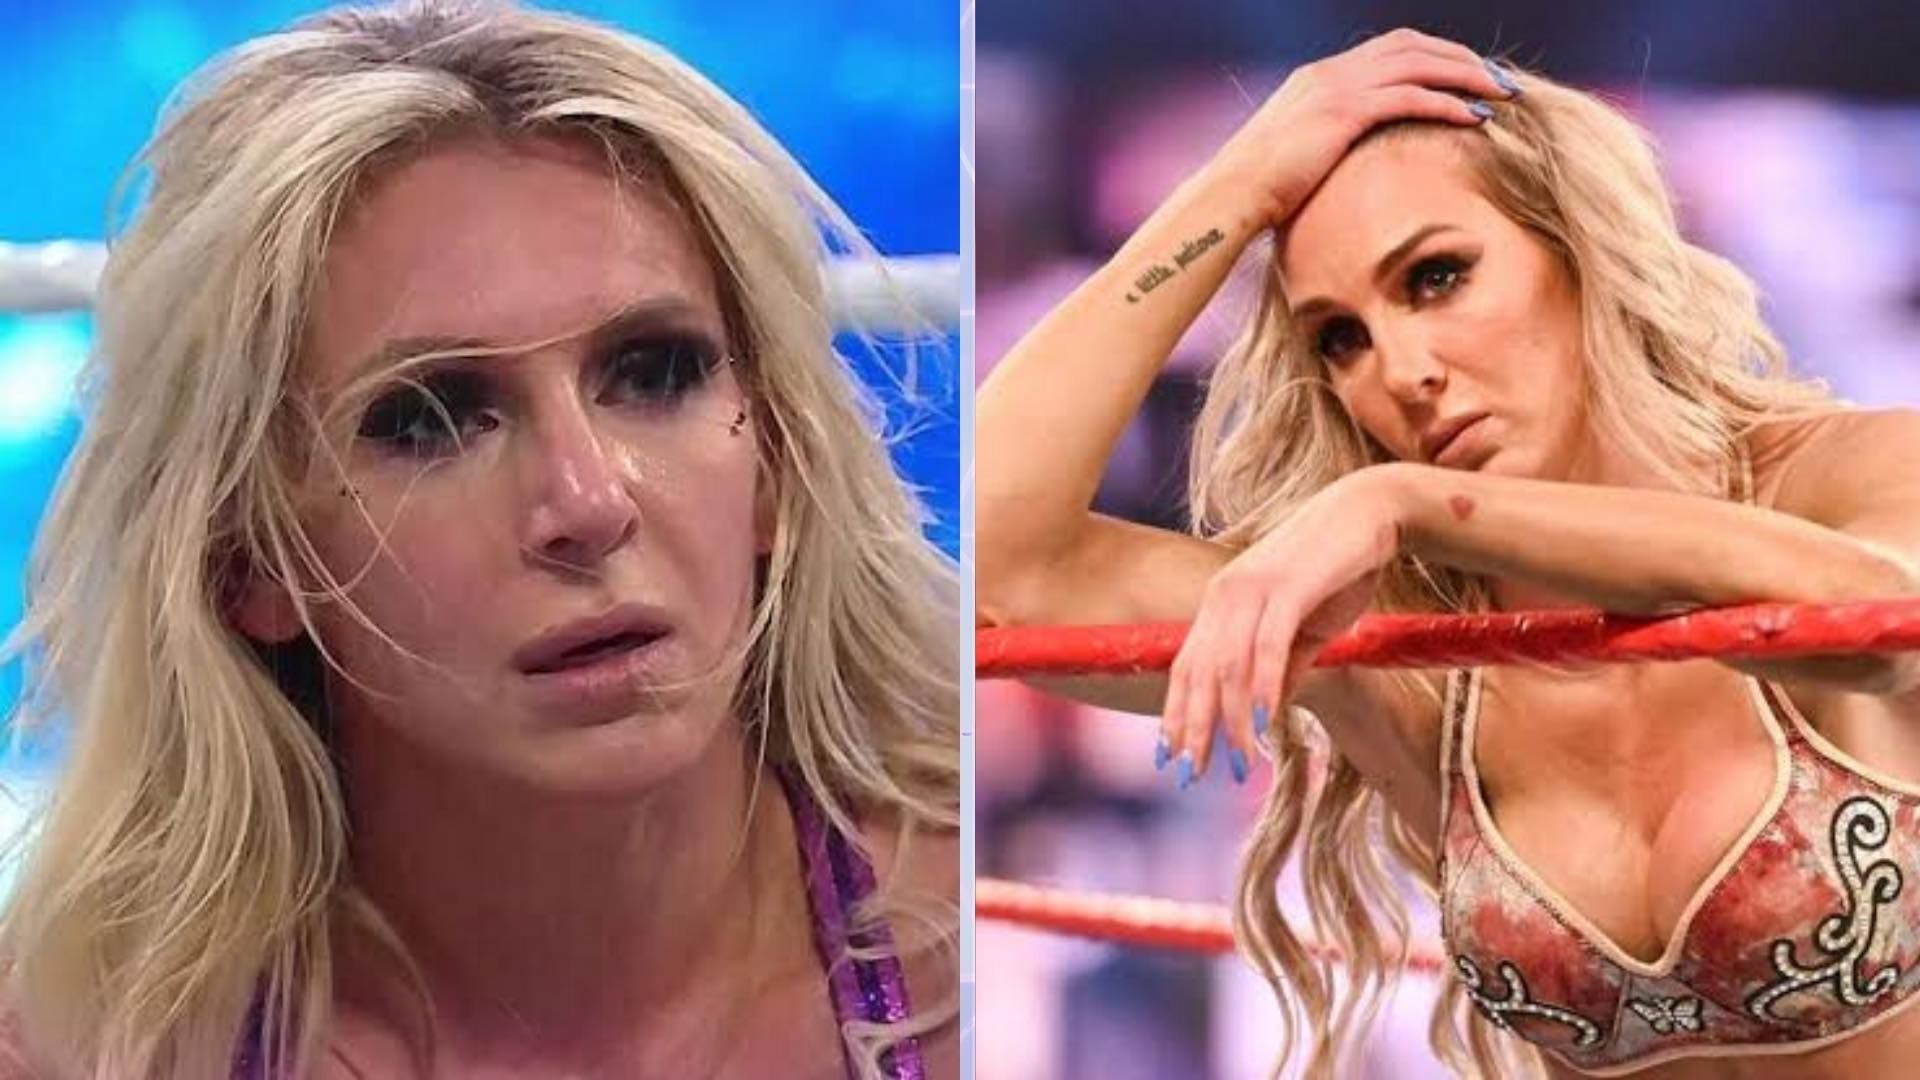 Charlotte Flair was injured on WWE SmackDown last Friday.